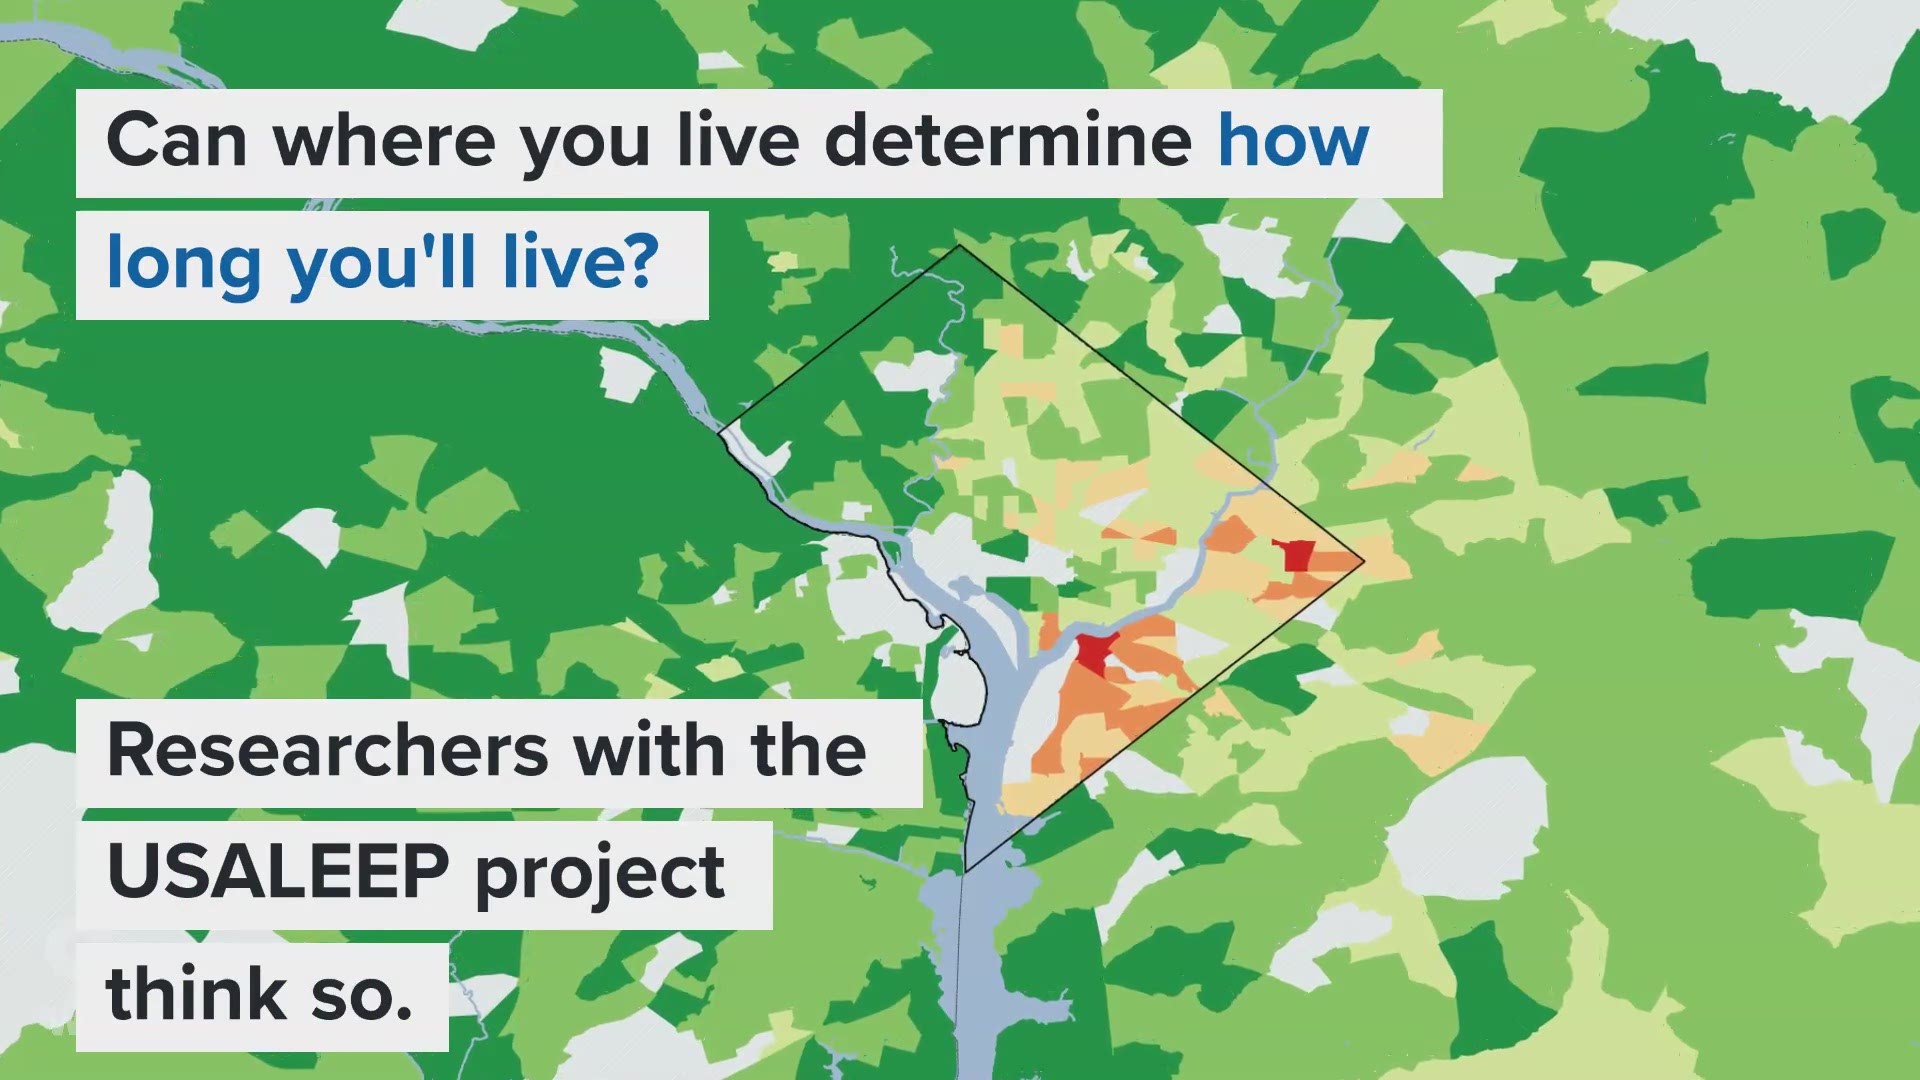 Researchers with the USALEEP project say the neighborhood you're born and live in might have a big impact on your life expectancy.